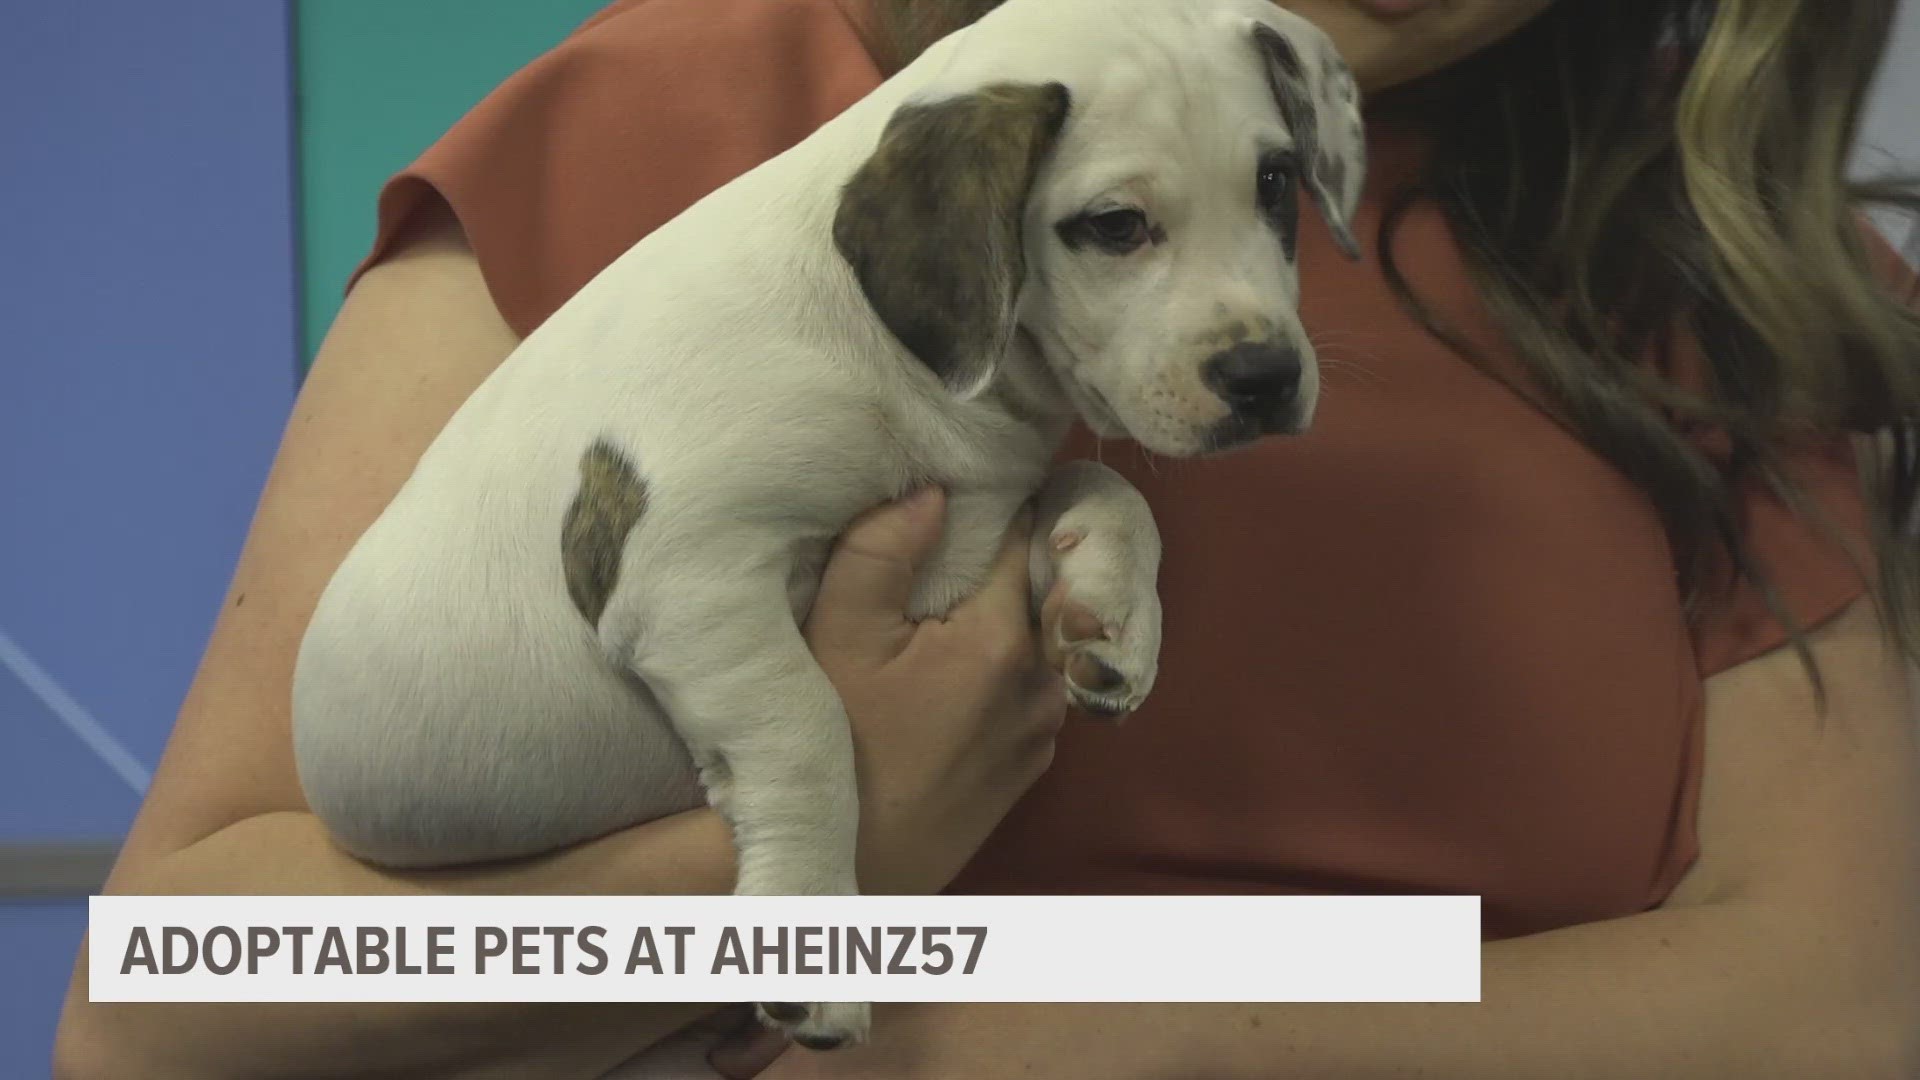 Amy Heinz with AHeinz57 Pet Rescue & Transport brought furry friends Rita and Patty, two 10-week old adoptable pups, to join Local 5 at Midday.